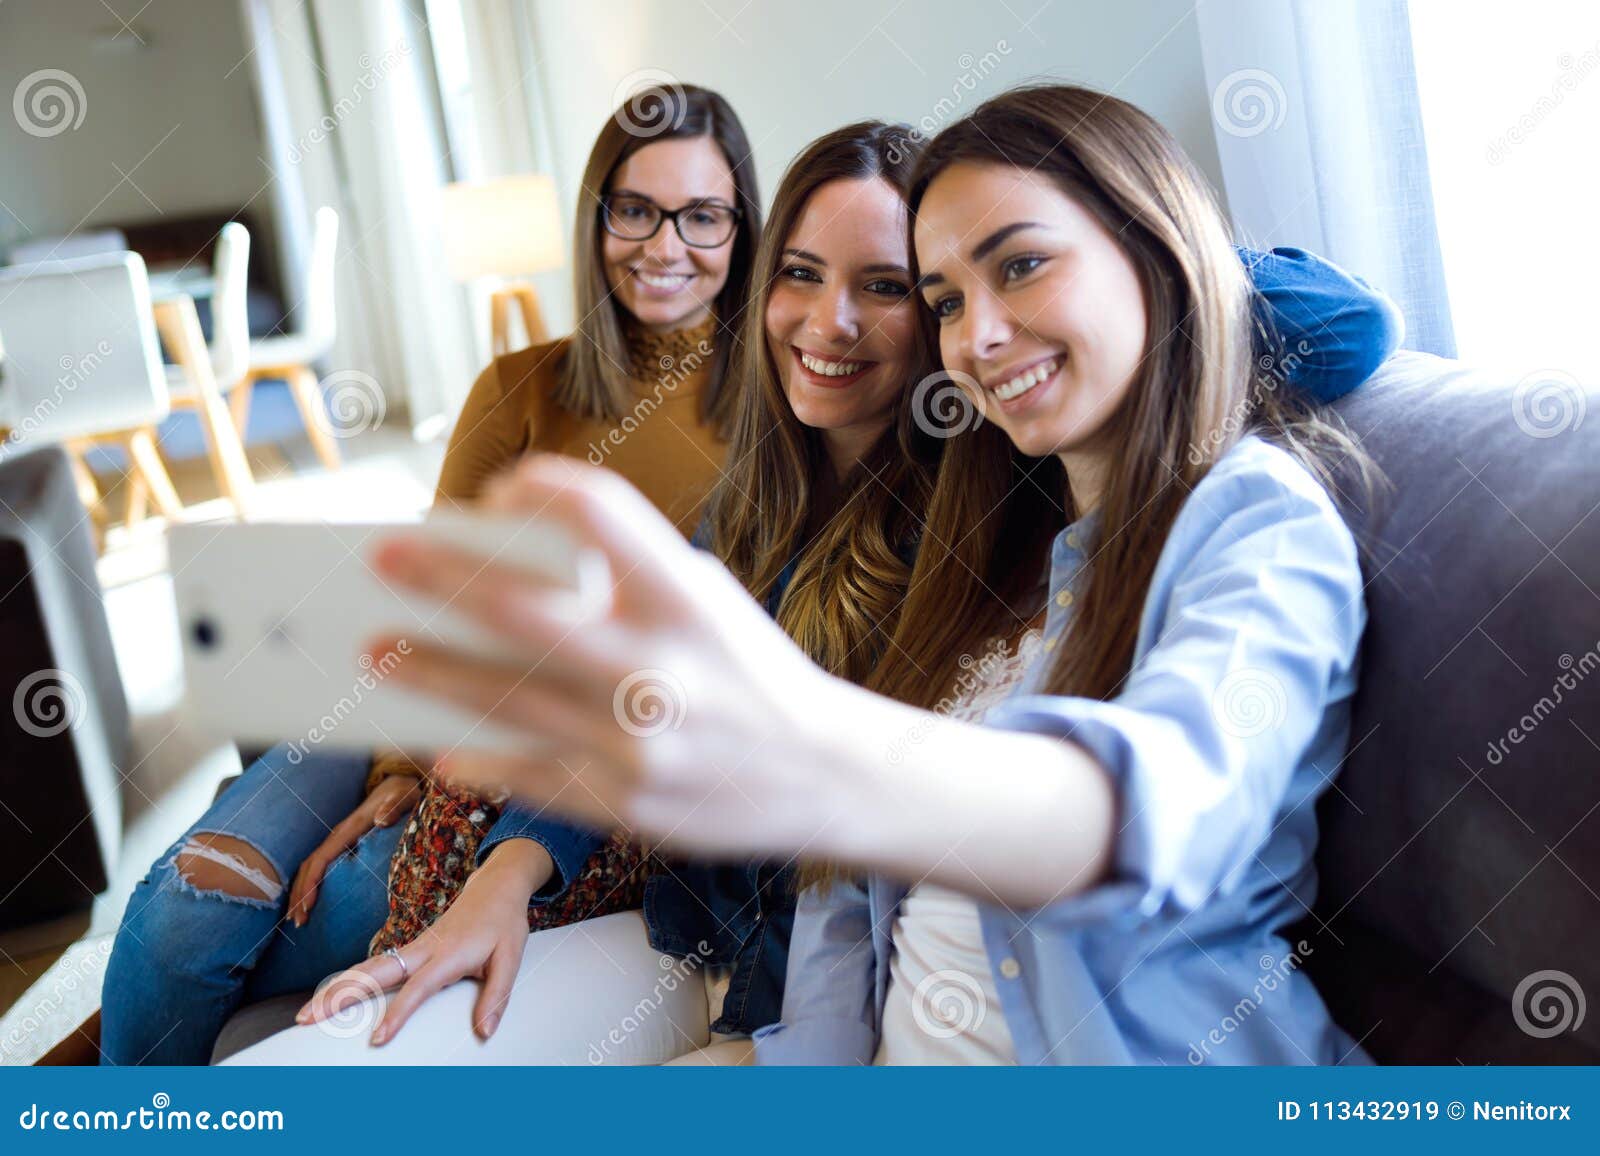 Three Happy Beautiful Women Taking a Selfie and Enjoying Time Together ...